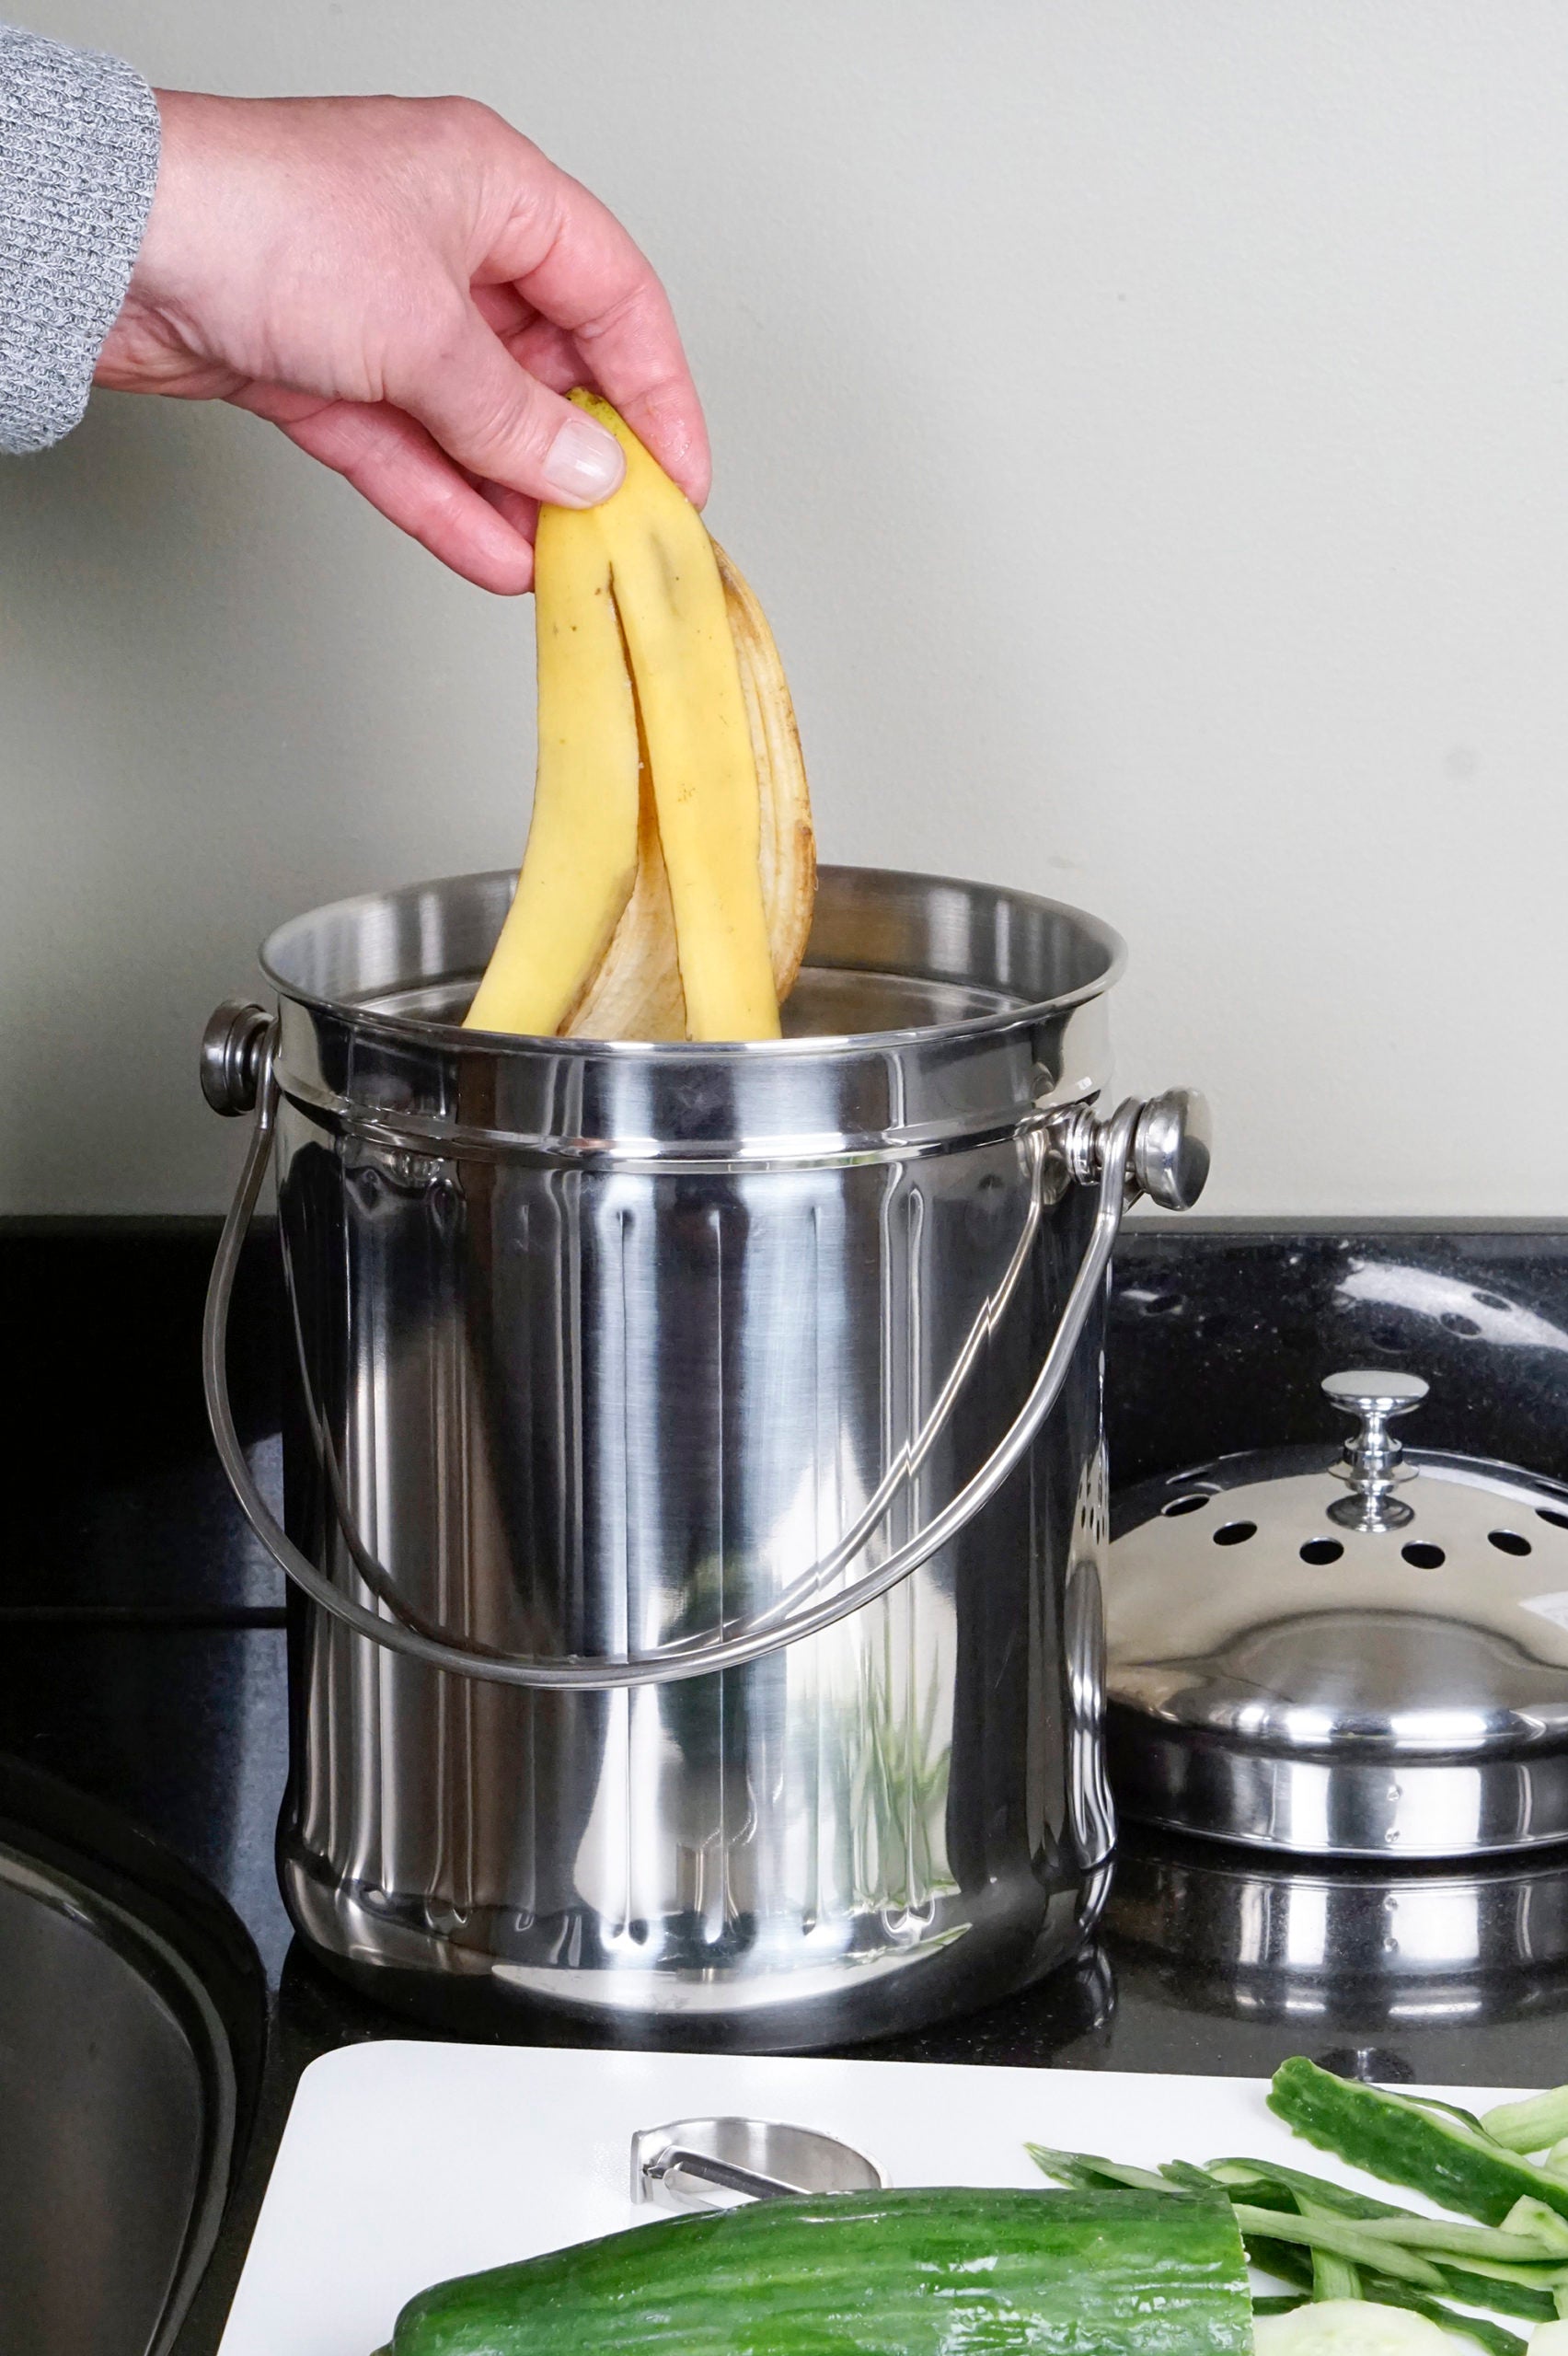 hand putting banana peel into compost pail on countertop.